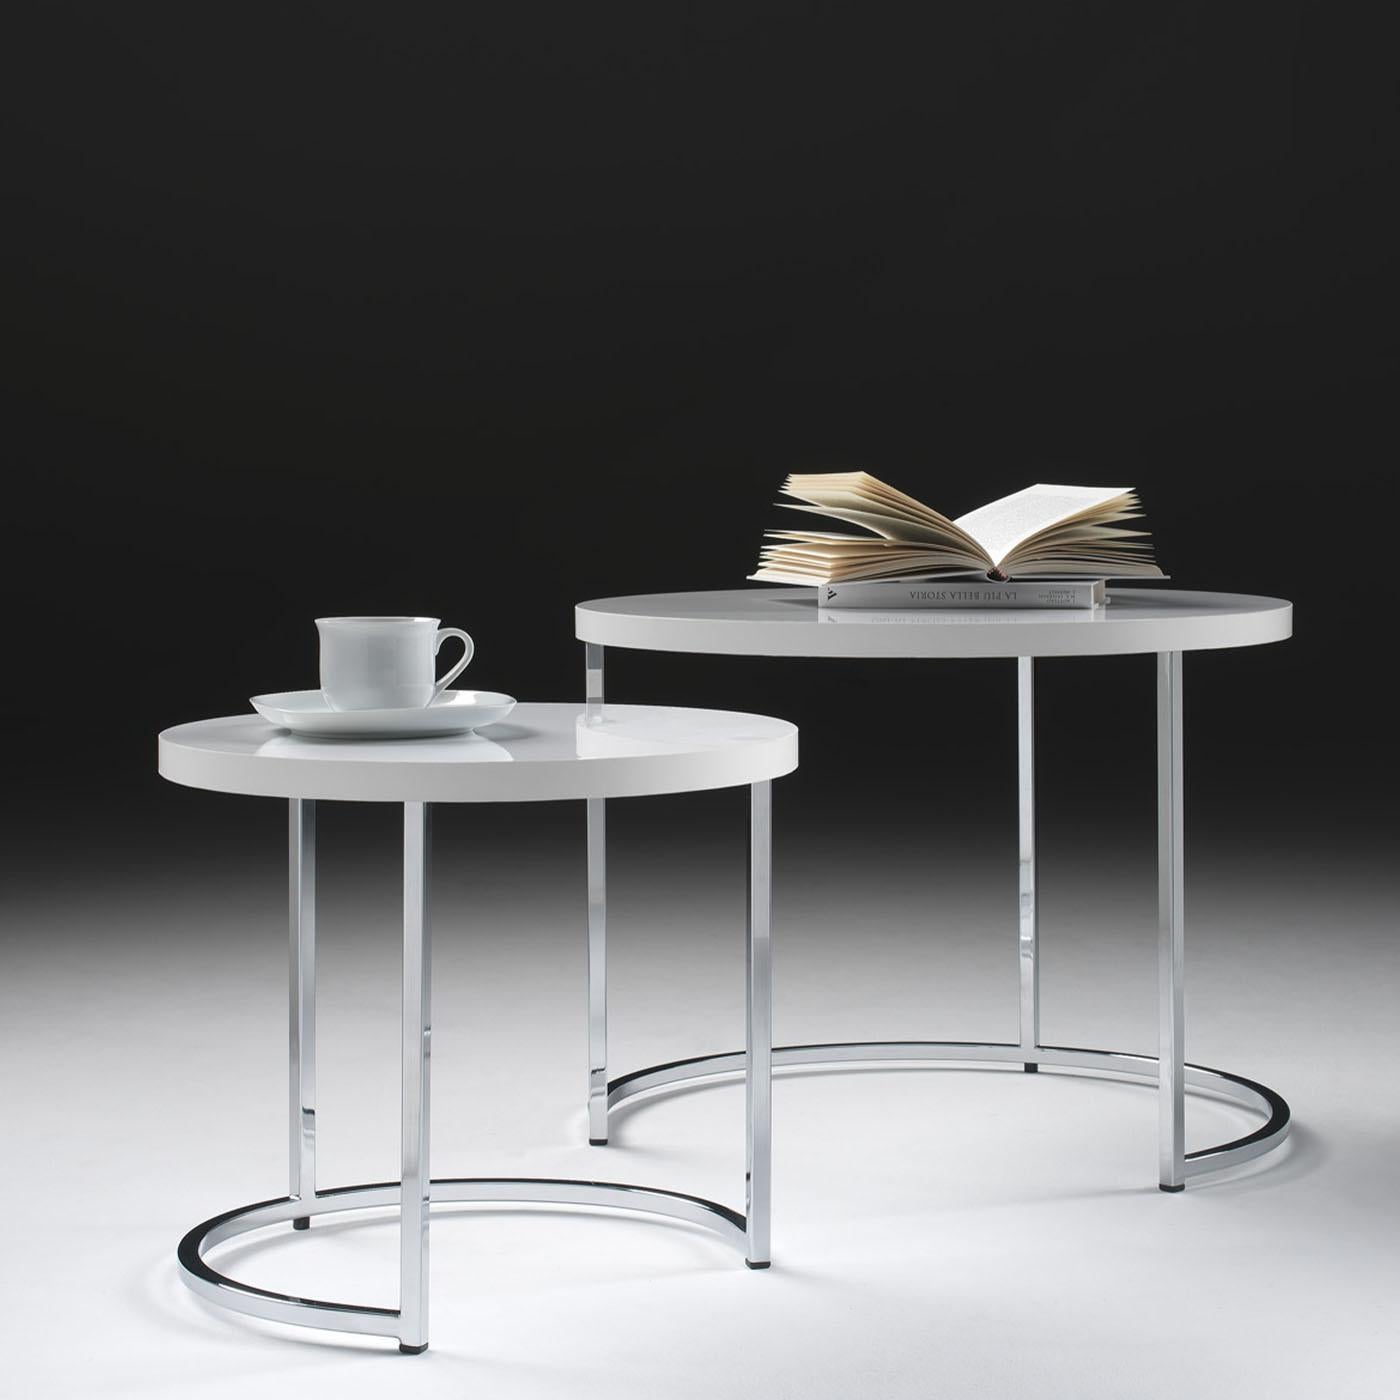 This set of two coffee tables designed by Danilo Bonfanti & Gabriele Moscatelli features a sleek metal frame exuding contemporary sophistication. The tabletops feature ash wood veneers supported by a chrome structure, ensuring durability with a